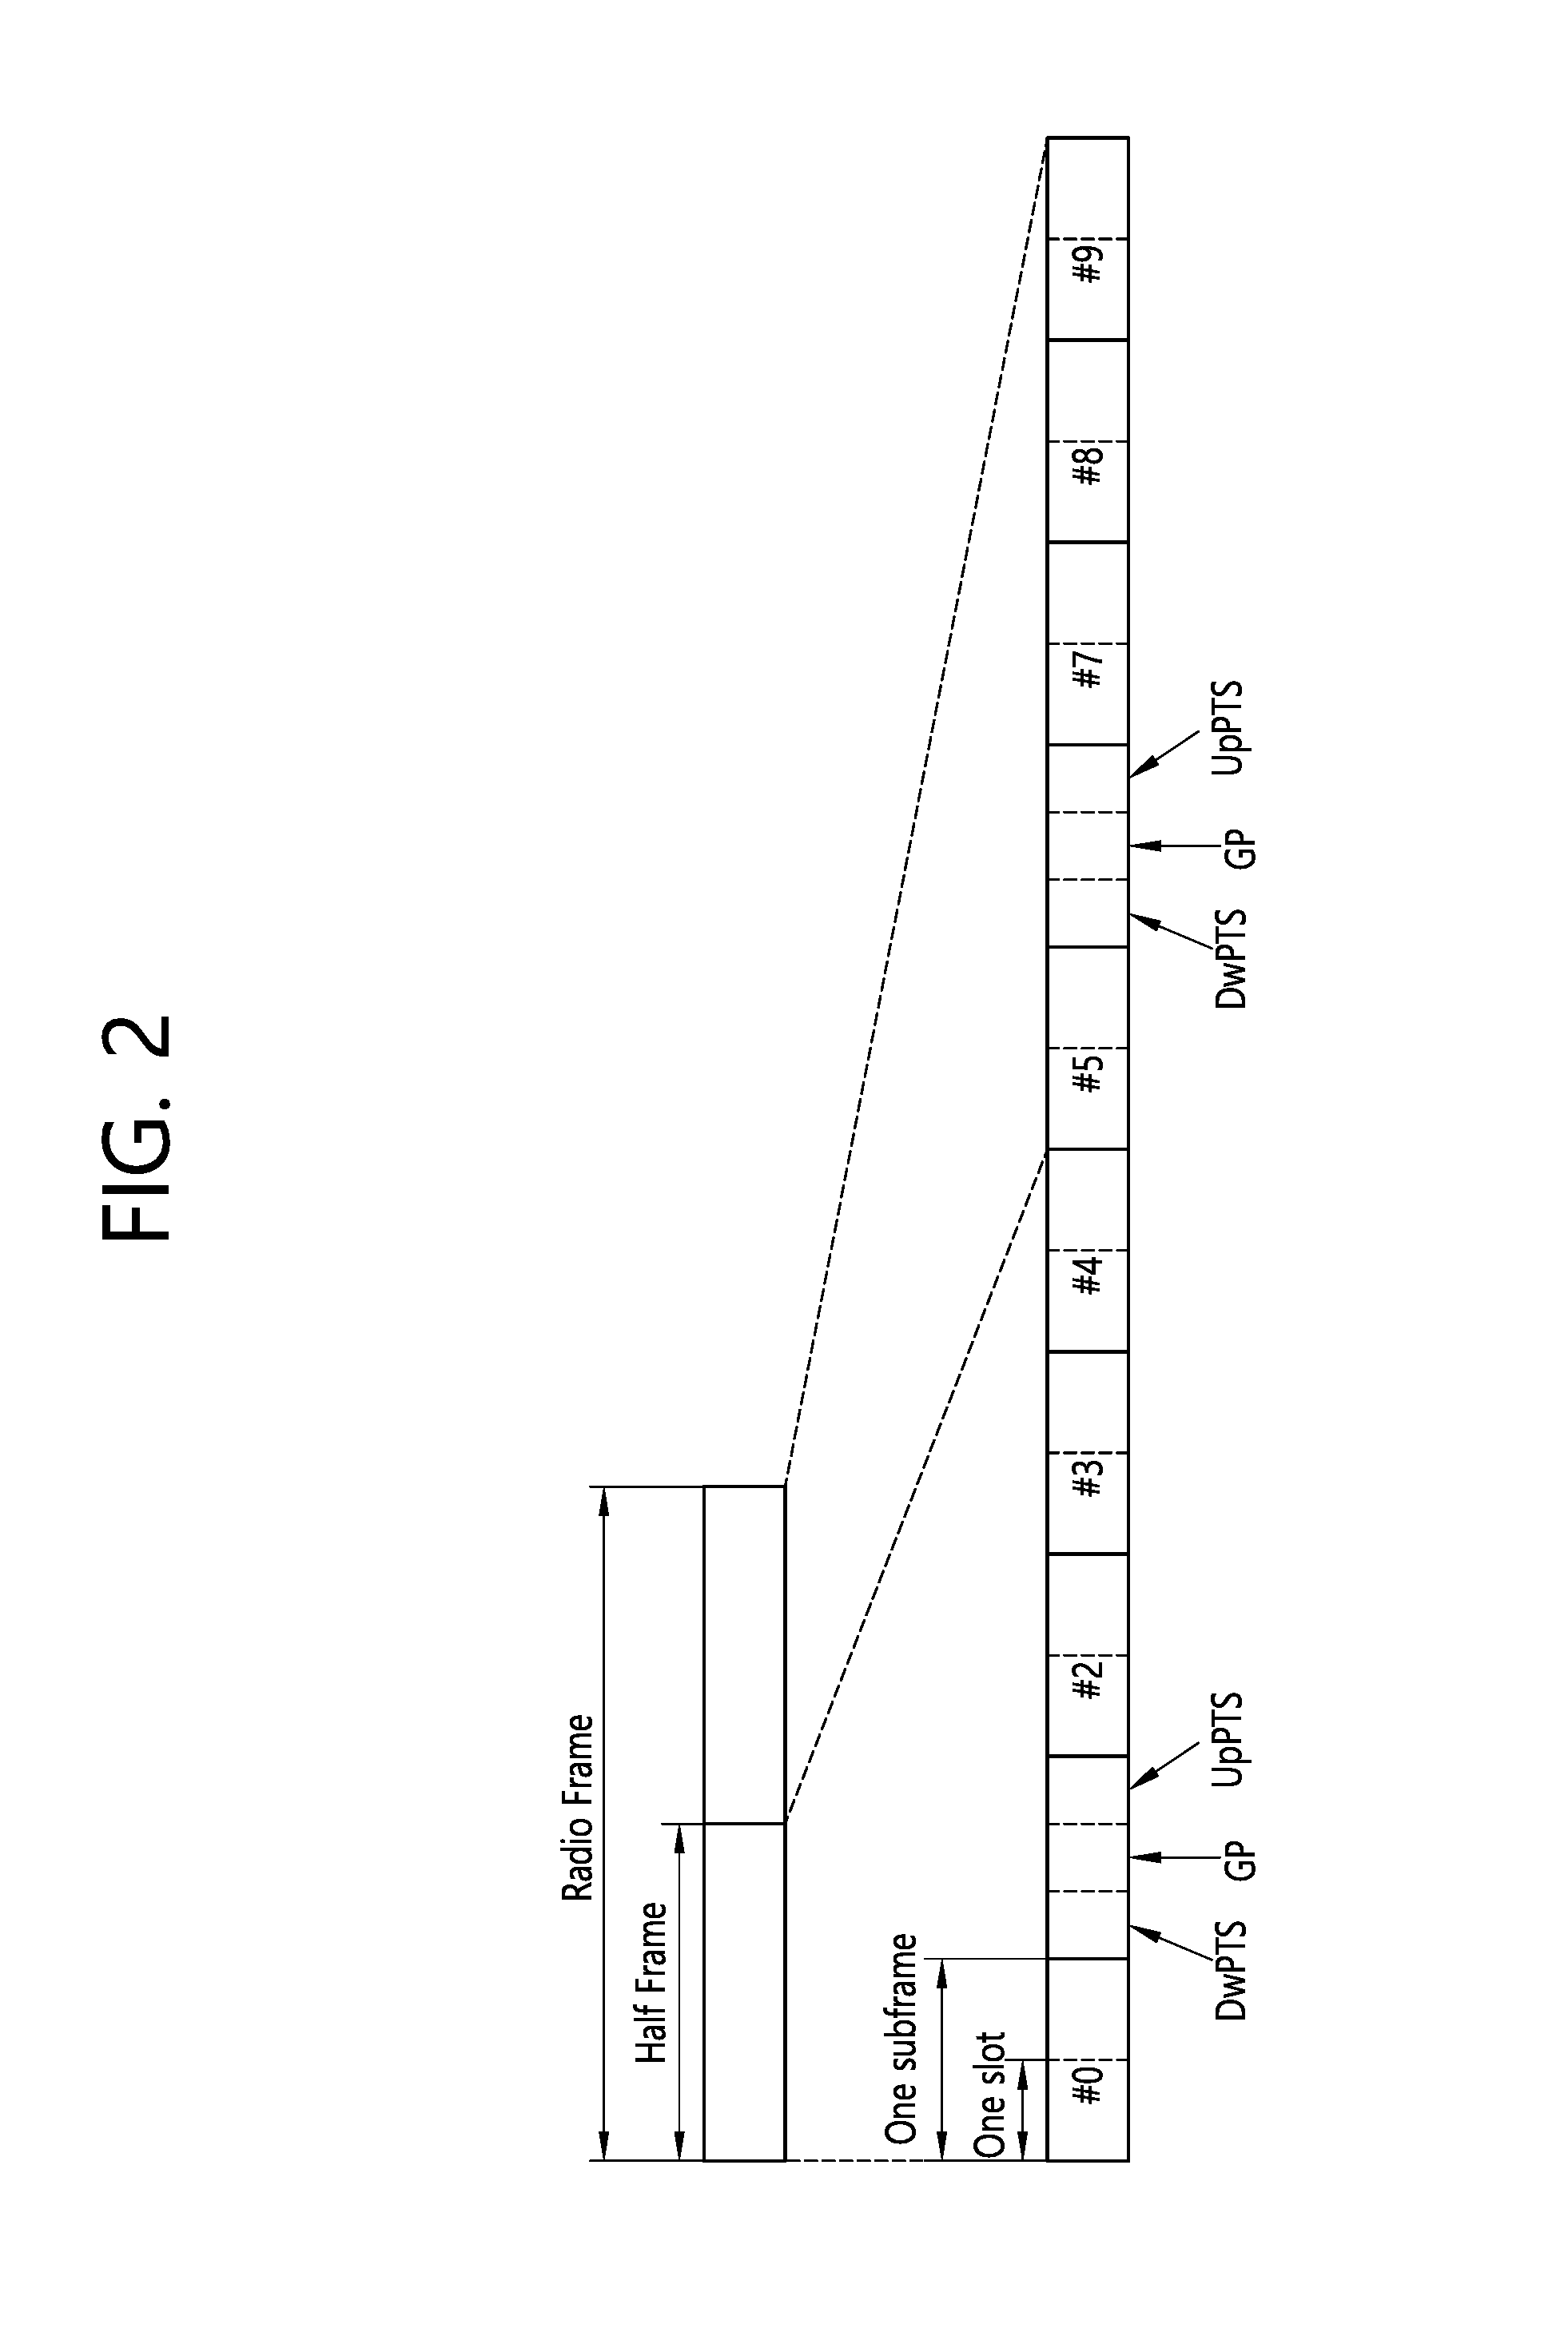 Method for determining uplink transmission timing of terminal having plurality of cells configured therein in wireless communication system, and apparatus using the method